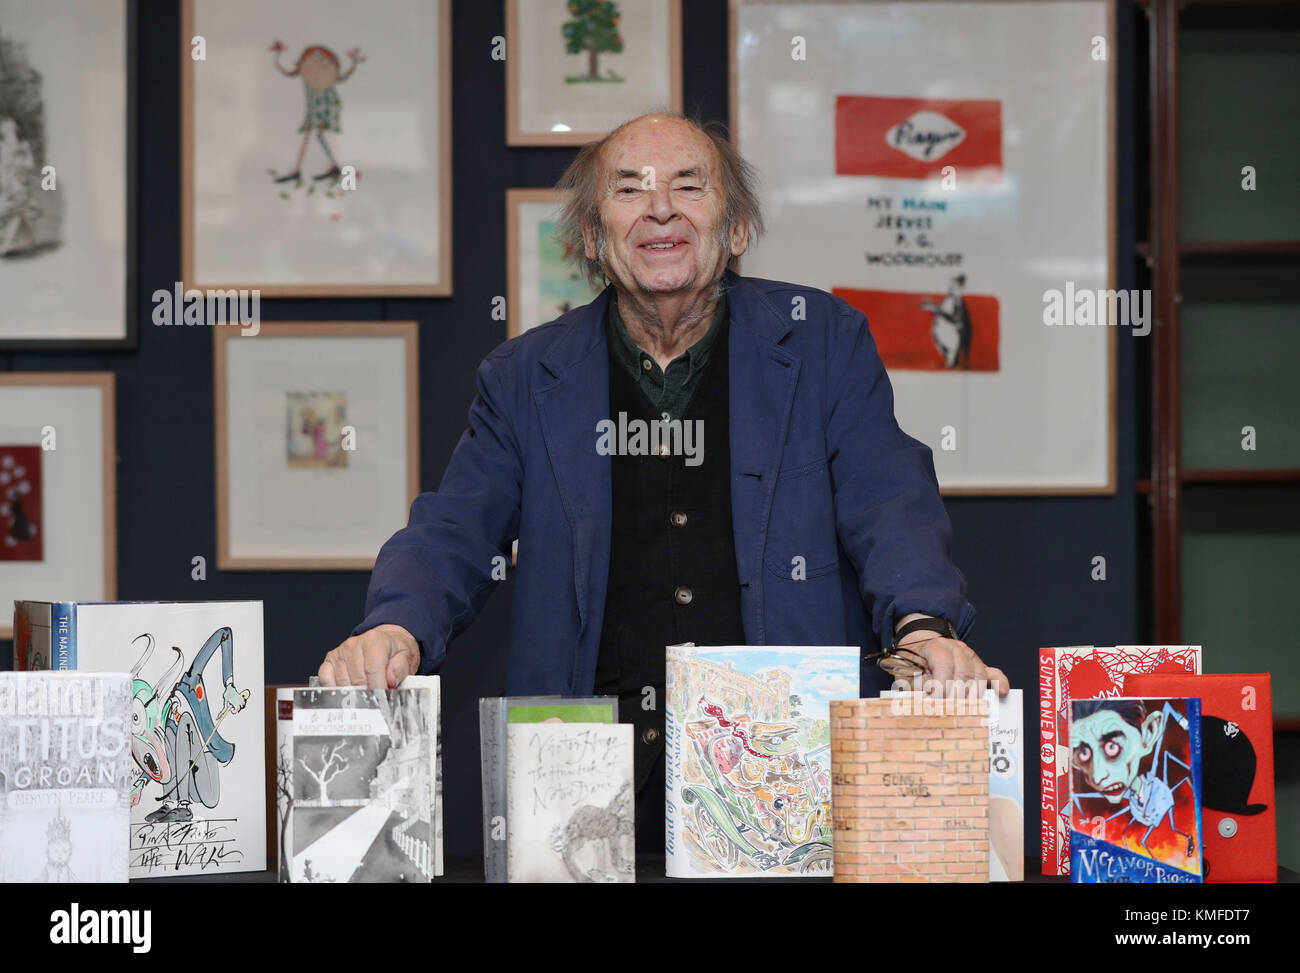 Sir Quentin Blake stands amongst books which are part of SothebyÕs ...